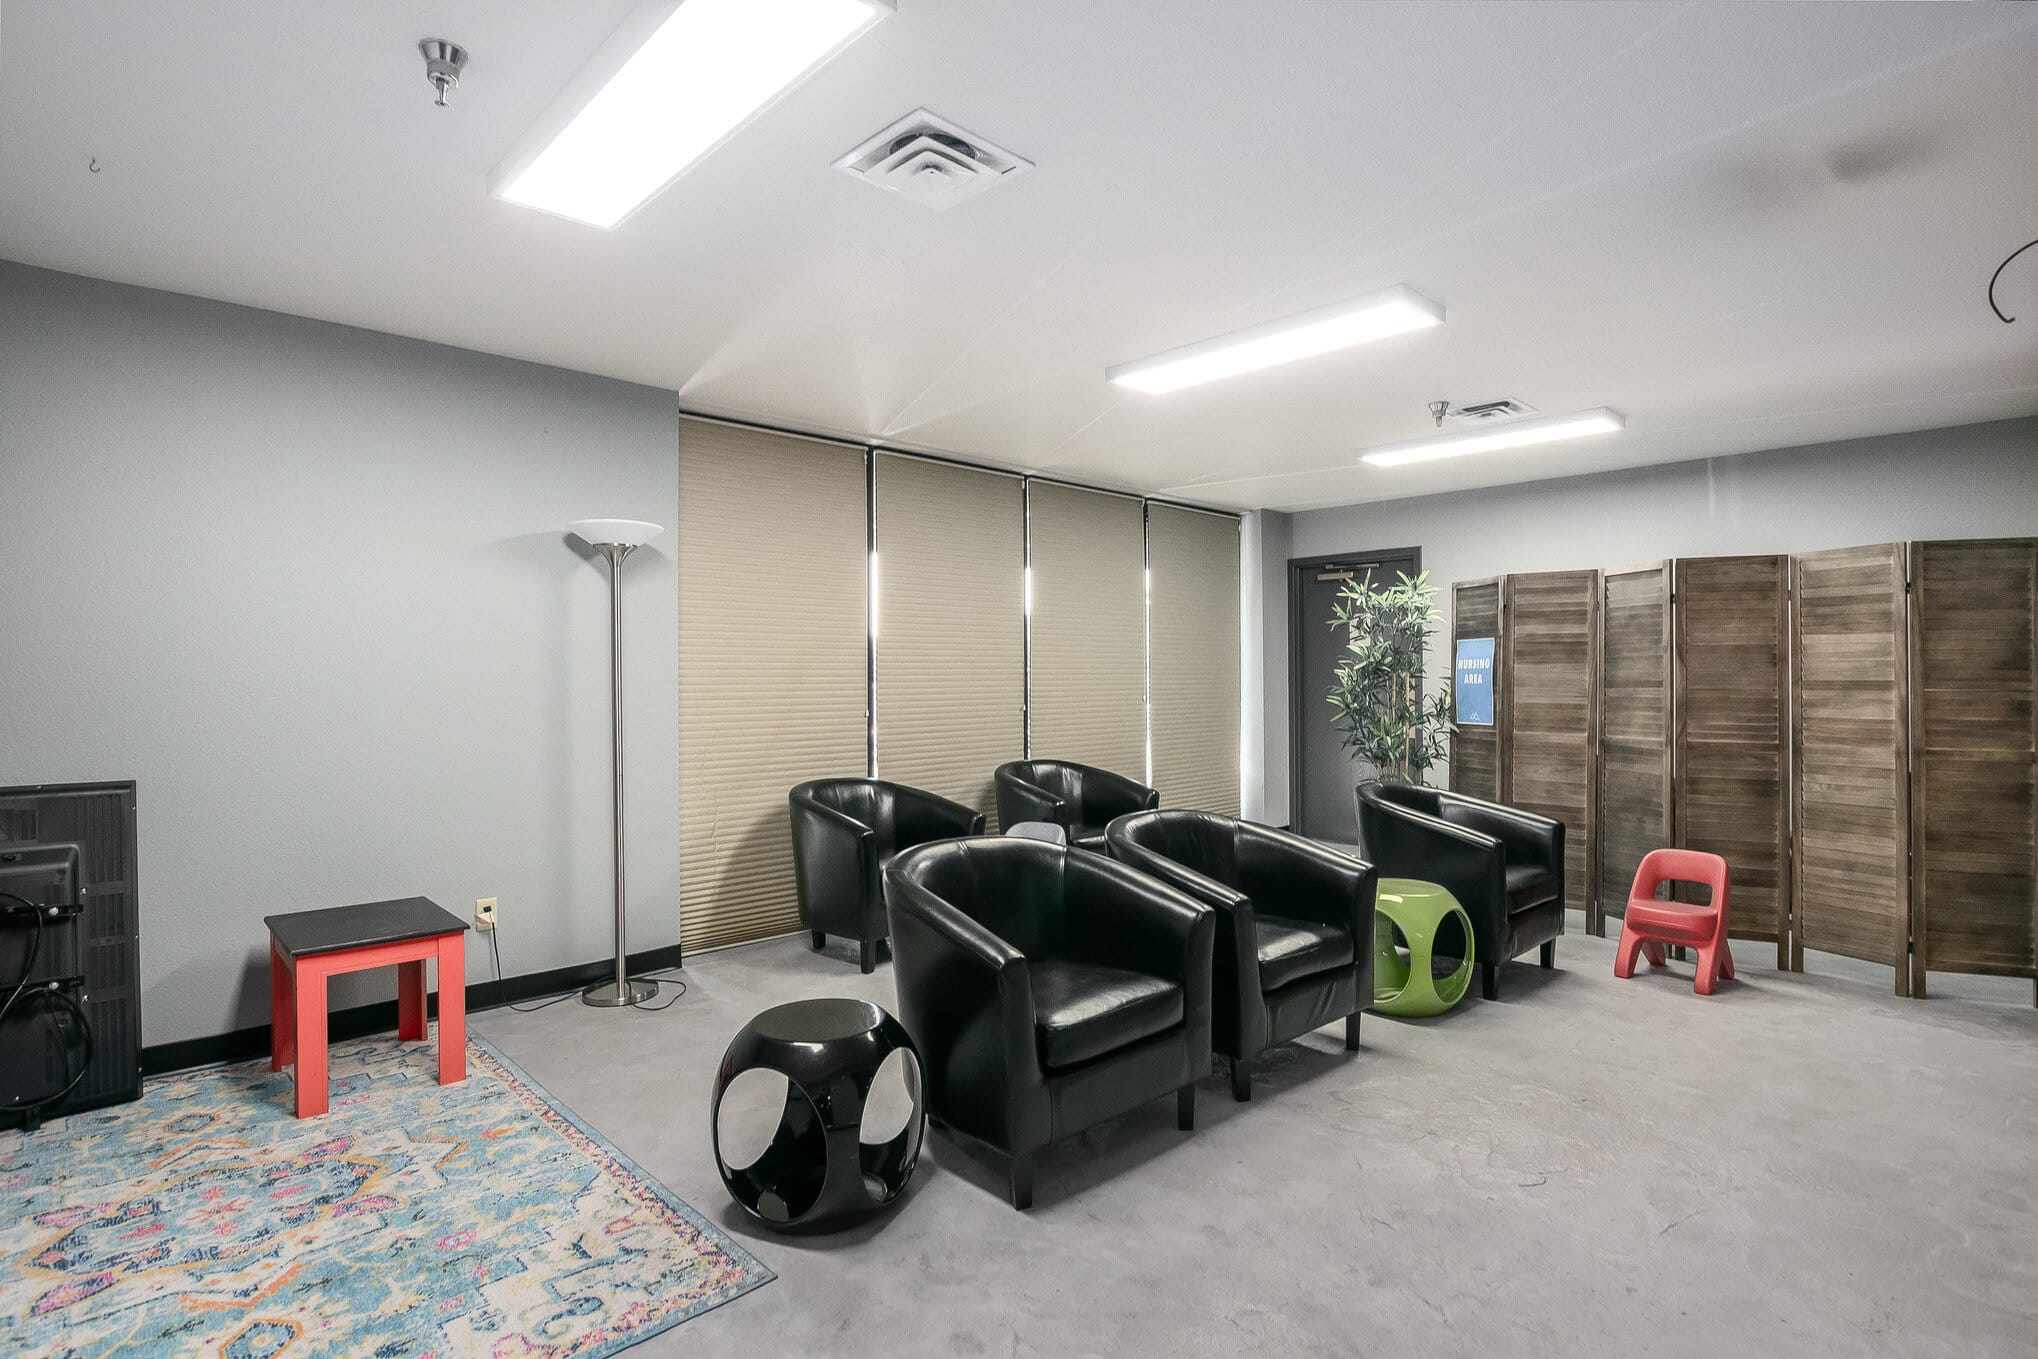 Indoor commercial space with black leather armchairs and funky metal side tables in green and black